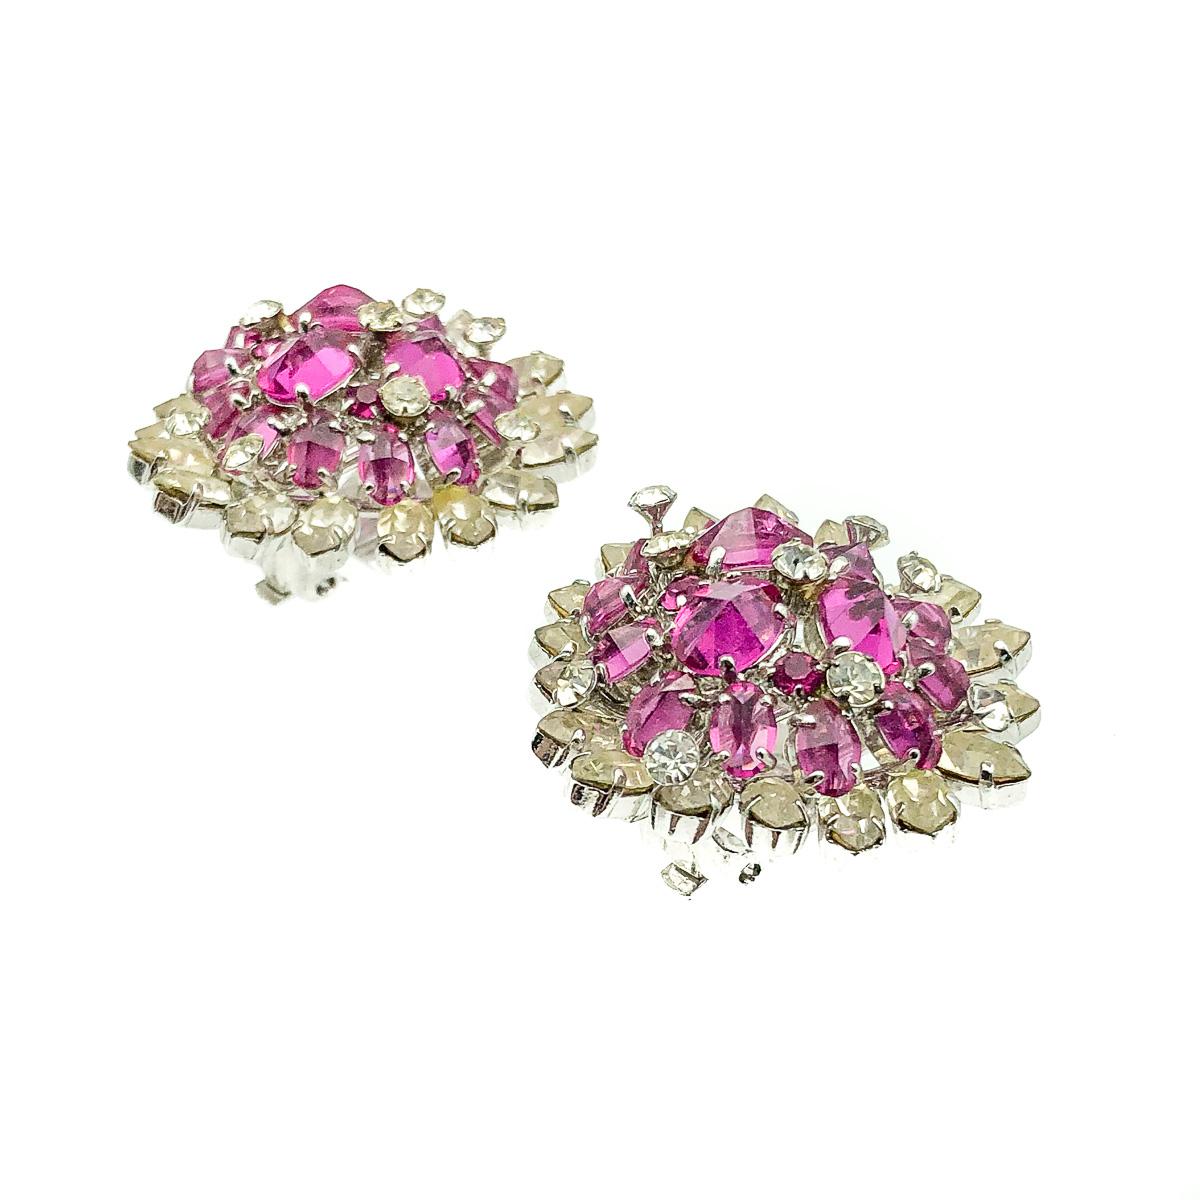 A beautiful and large pair of 1960s Vintage Dior Heart Earrings. 
Exquisitely crafted in rhodium plated metal. Featuring the most divine shade of raspberry pink crystals in fancy cuts and with reverse setting in play too. Surrounded and interspersed